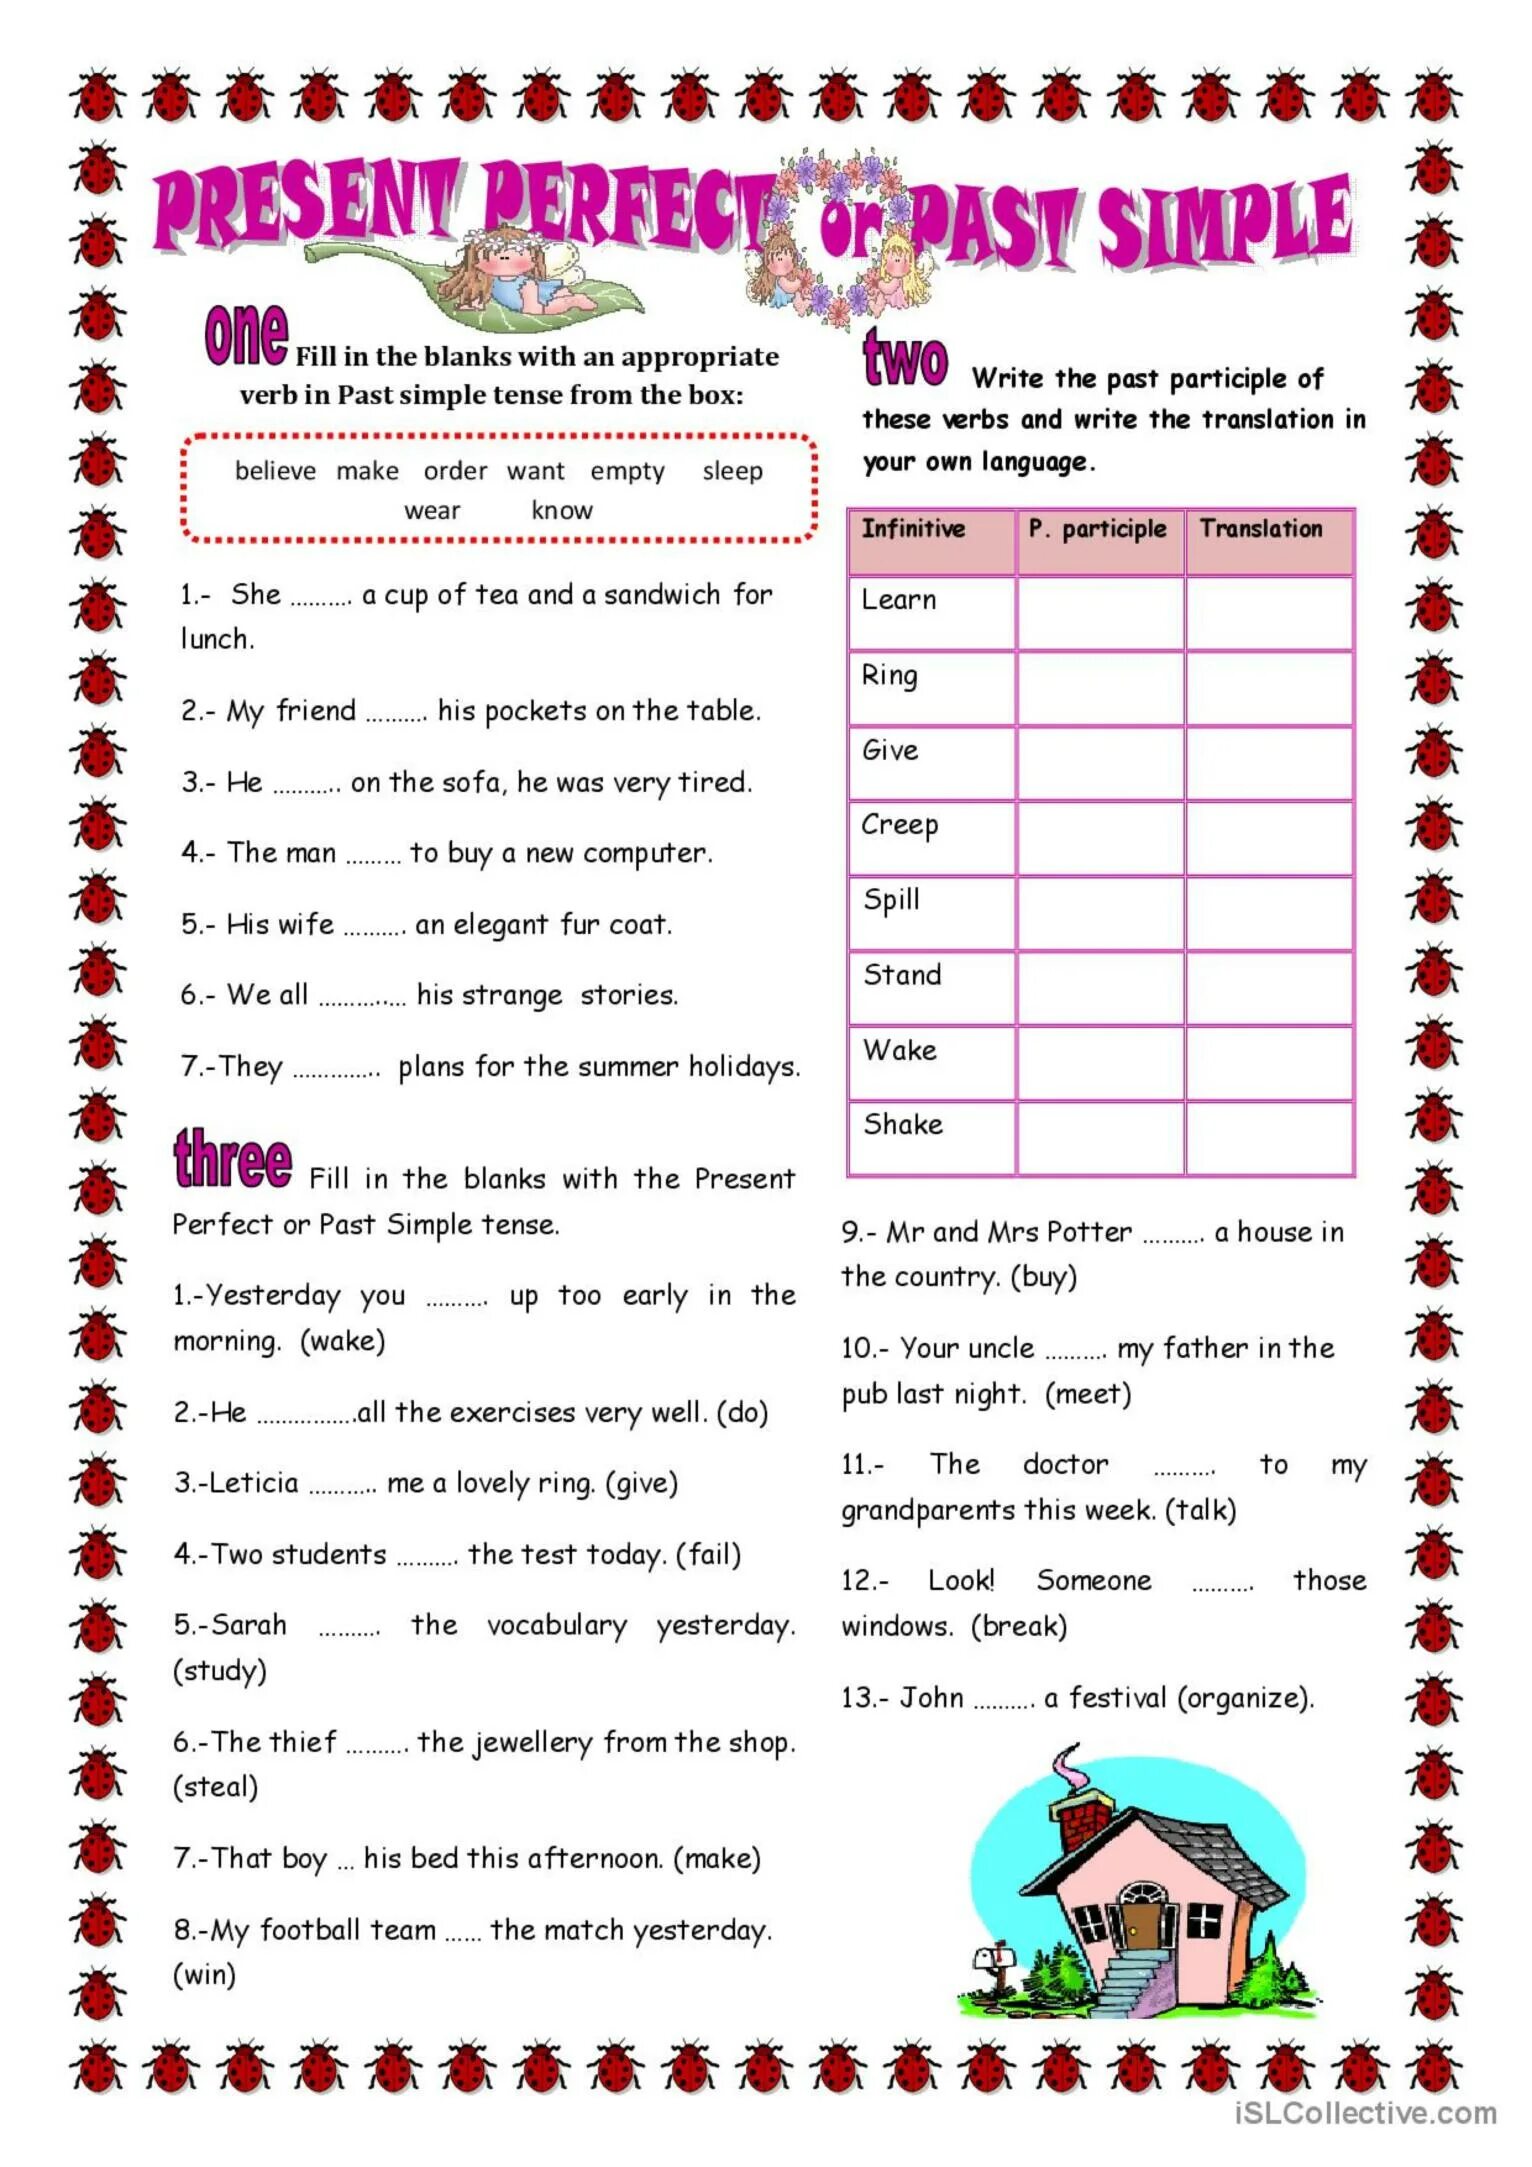 Present perfect or past simple упражнения. Present perfect vs past simple. Present perfect past simple Worksheets. Past simple present perfect упражнения Worksheet. Present perfect vs past simple worksheet